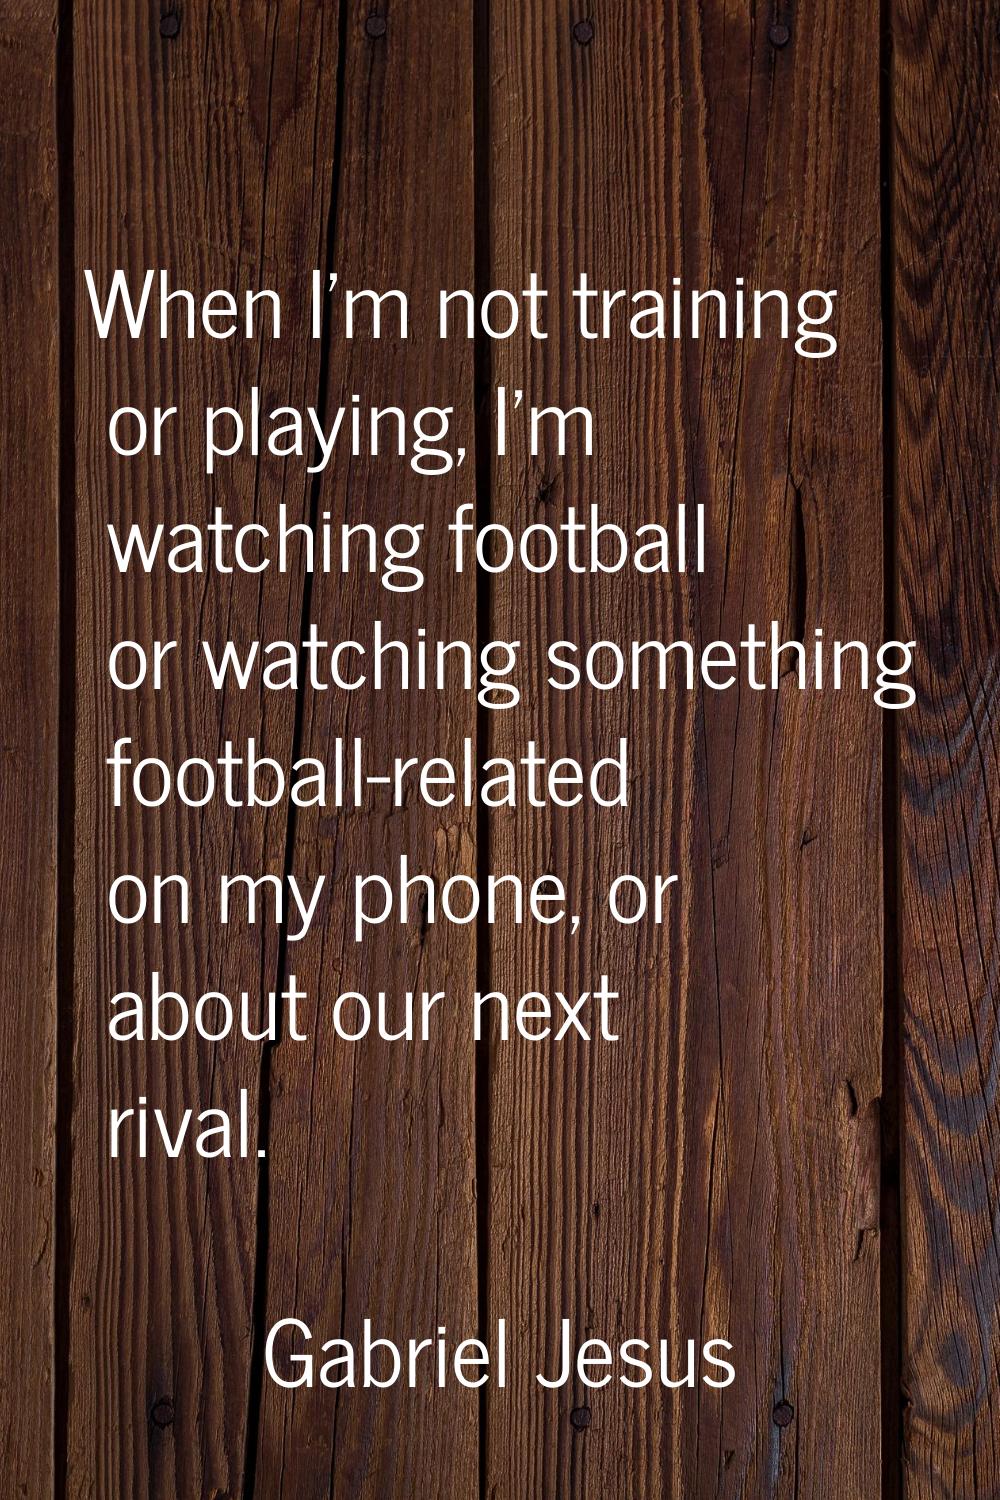 When I'm not training or playing, I'm watching football or watching something football-related on m